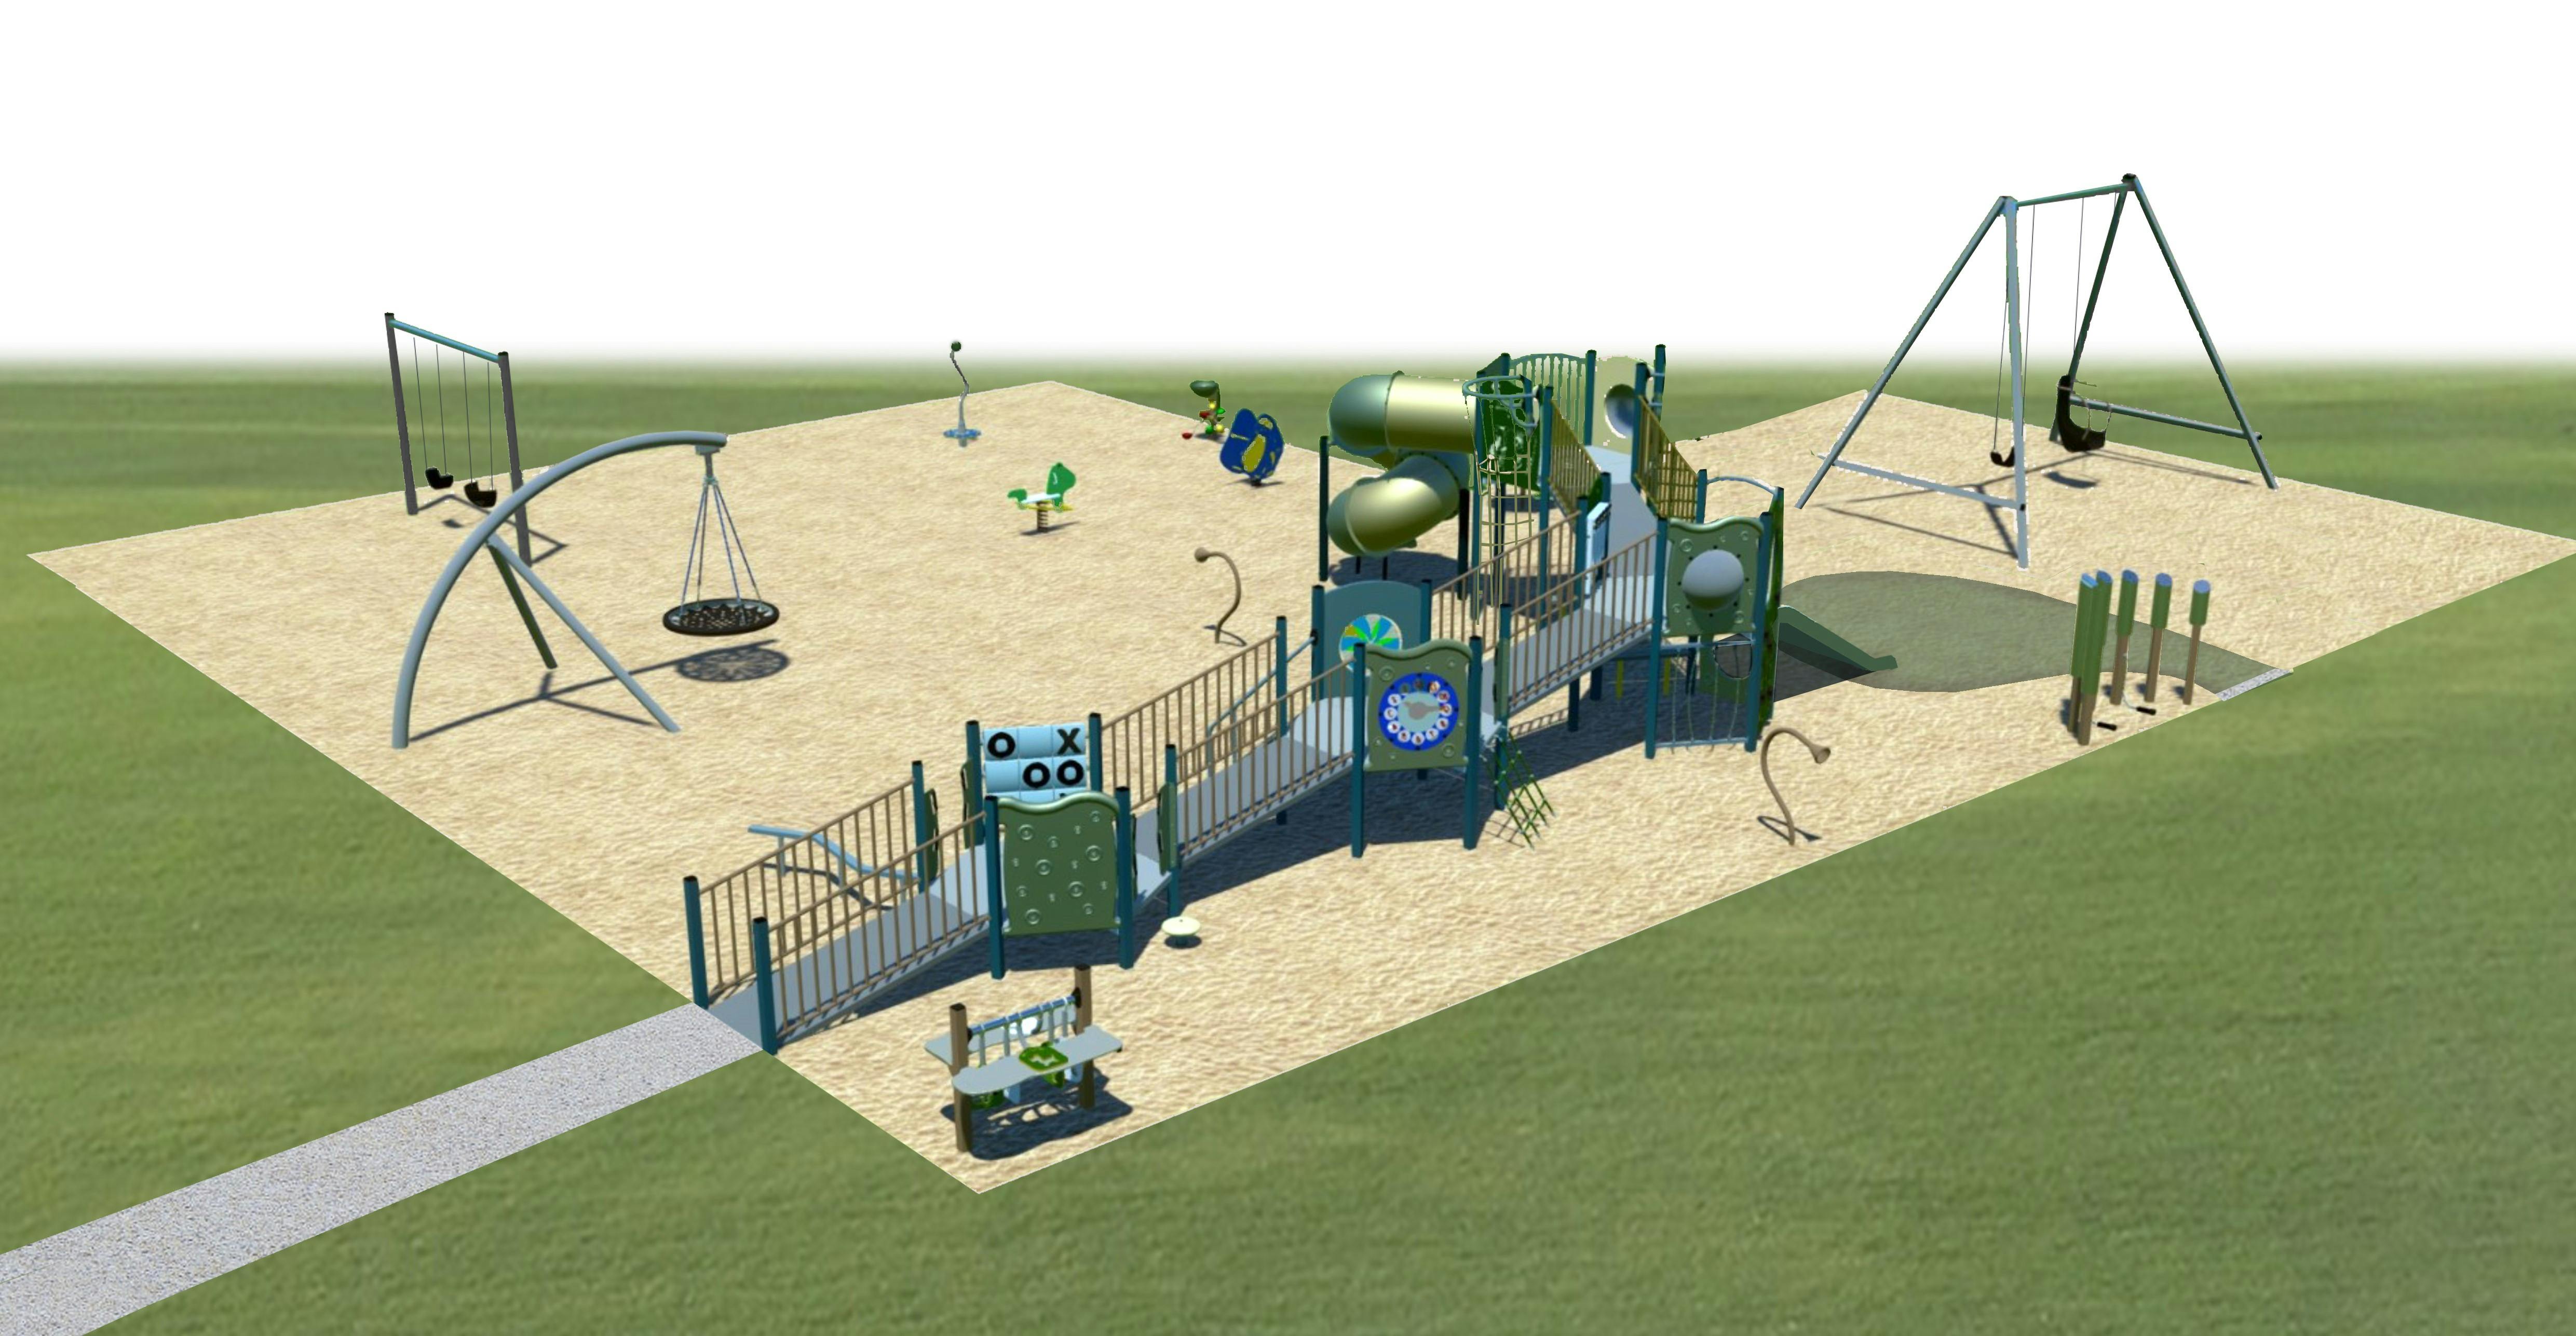 South-west view of playground final design